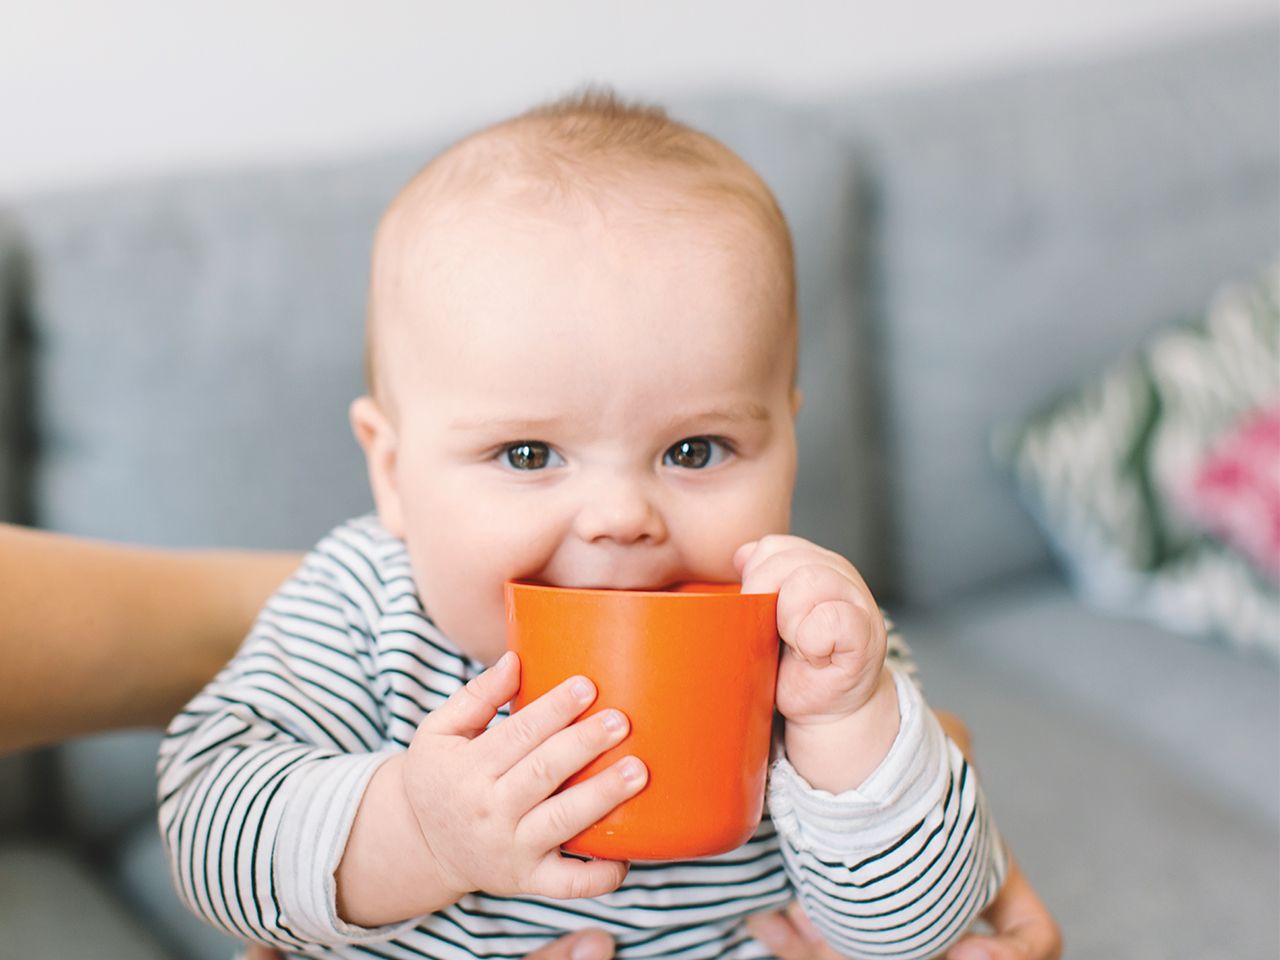 Review of the best sippy cups for babies in 2020 - advantages, disadvantages and price